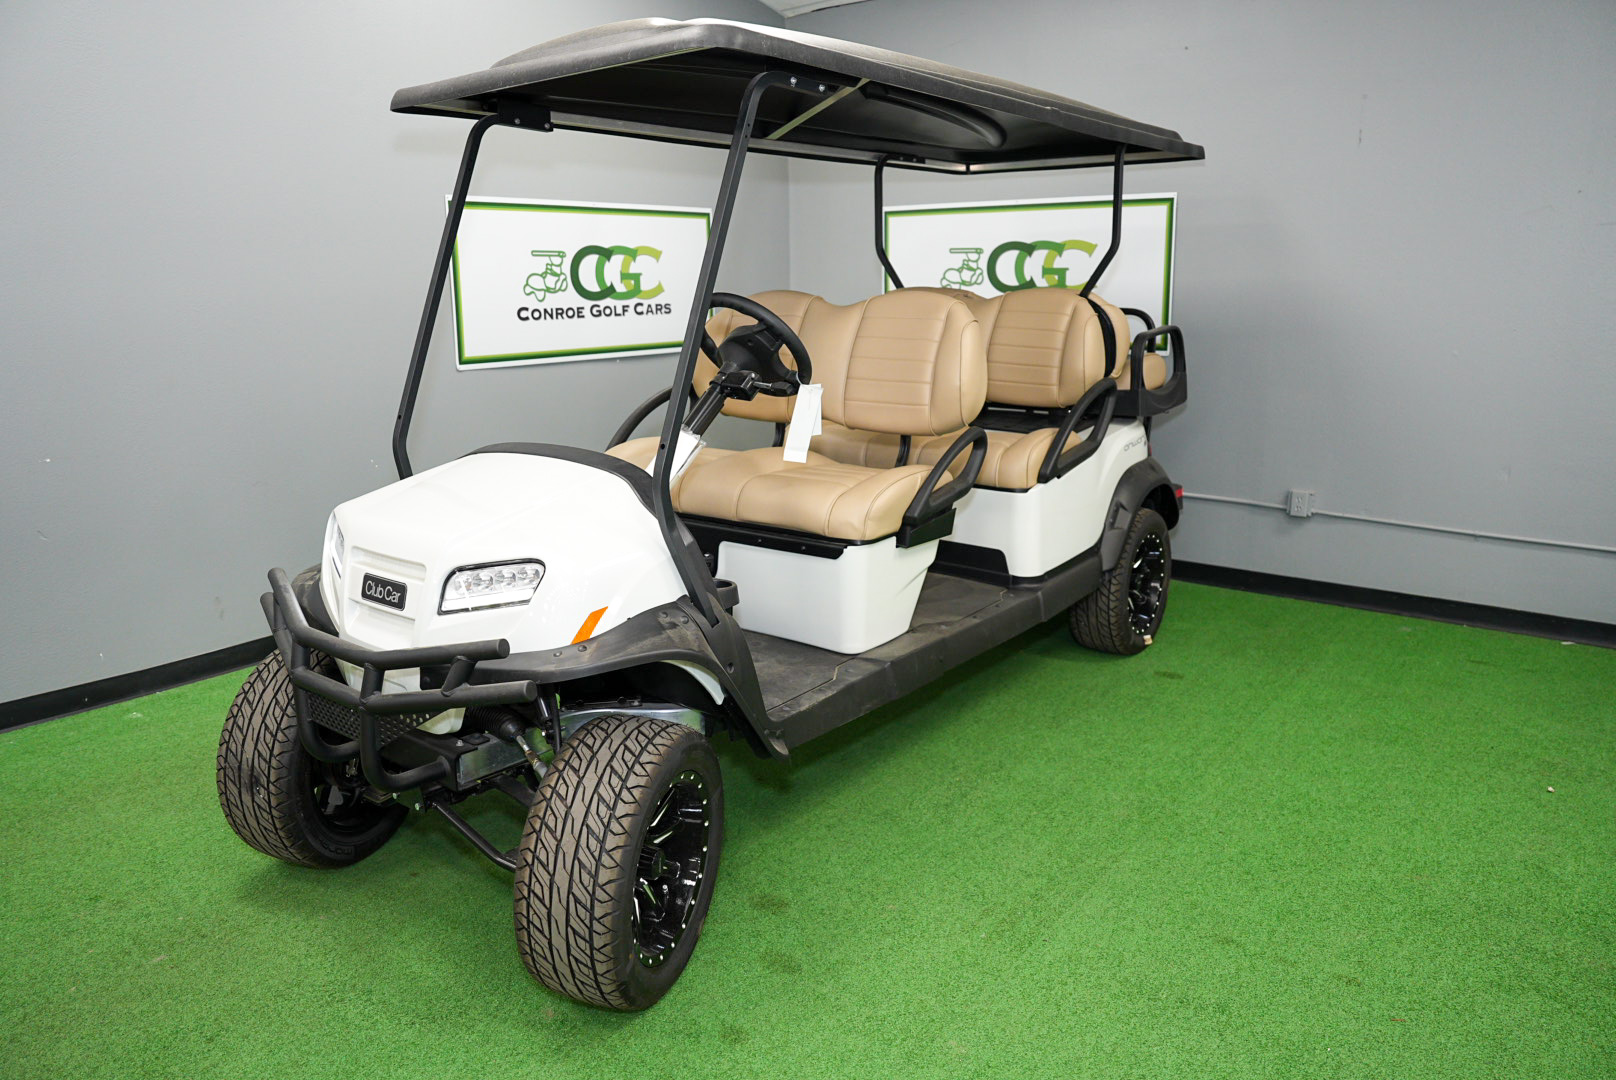 Check out our impressive inventory of the latest models of golf cars in every size and capacity, including the extended length model shown here.